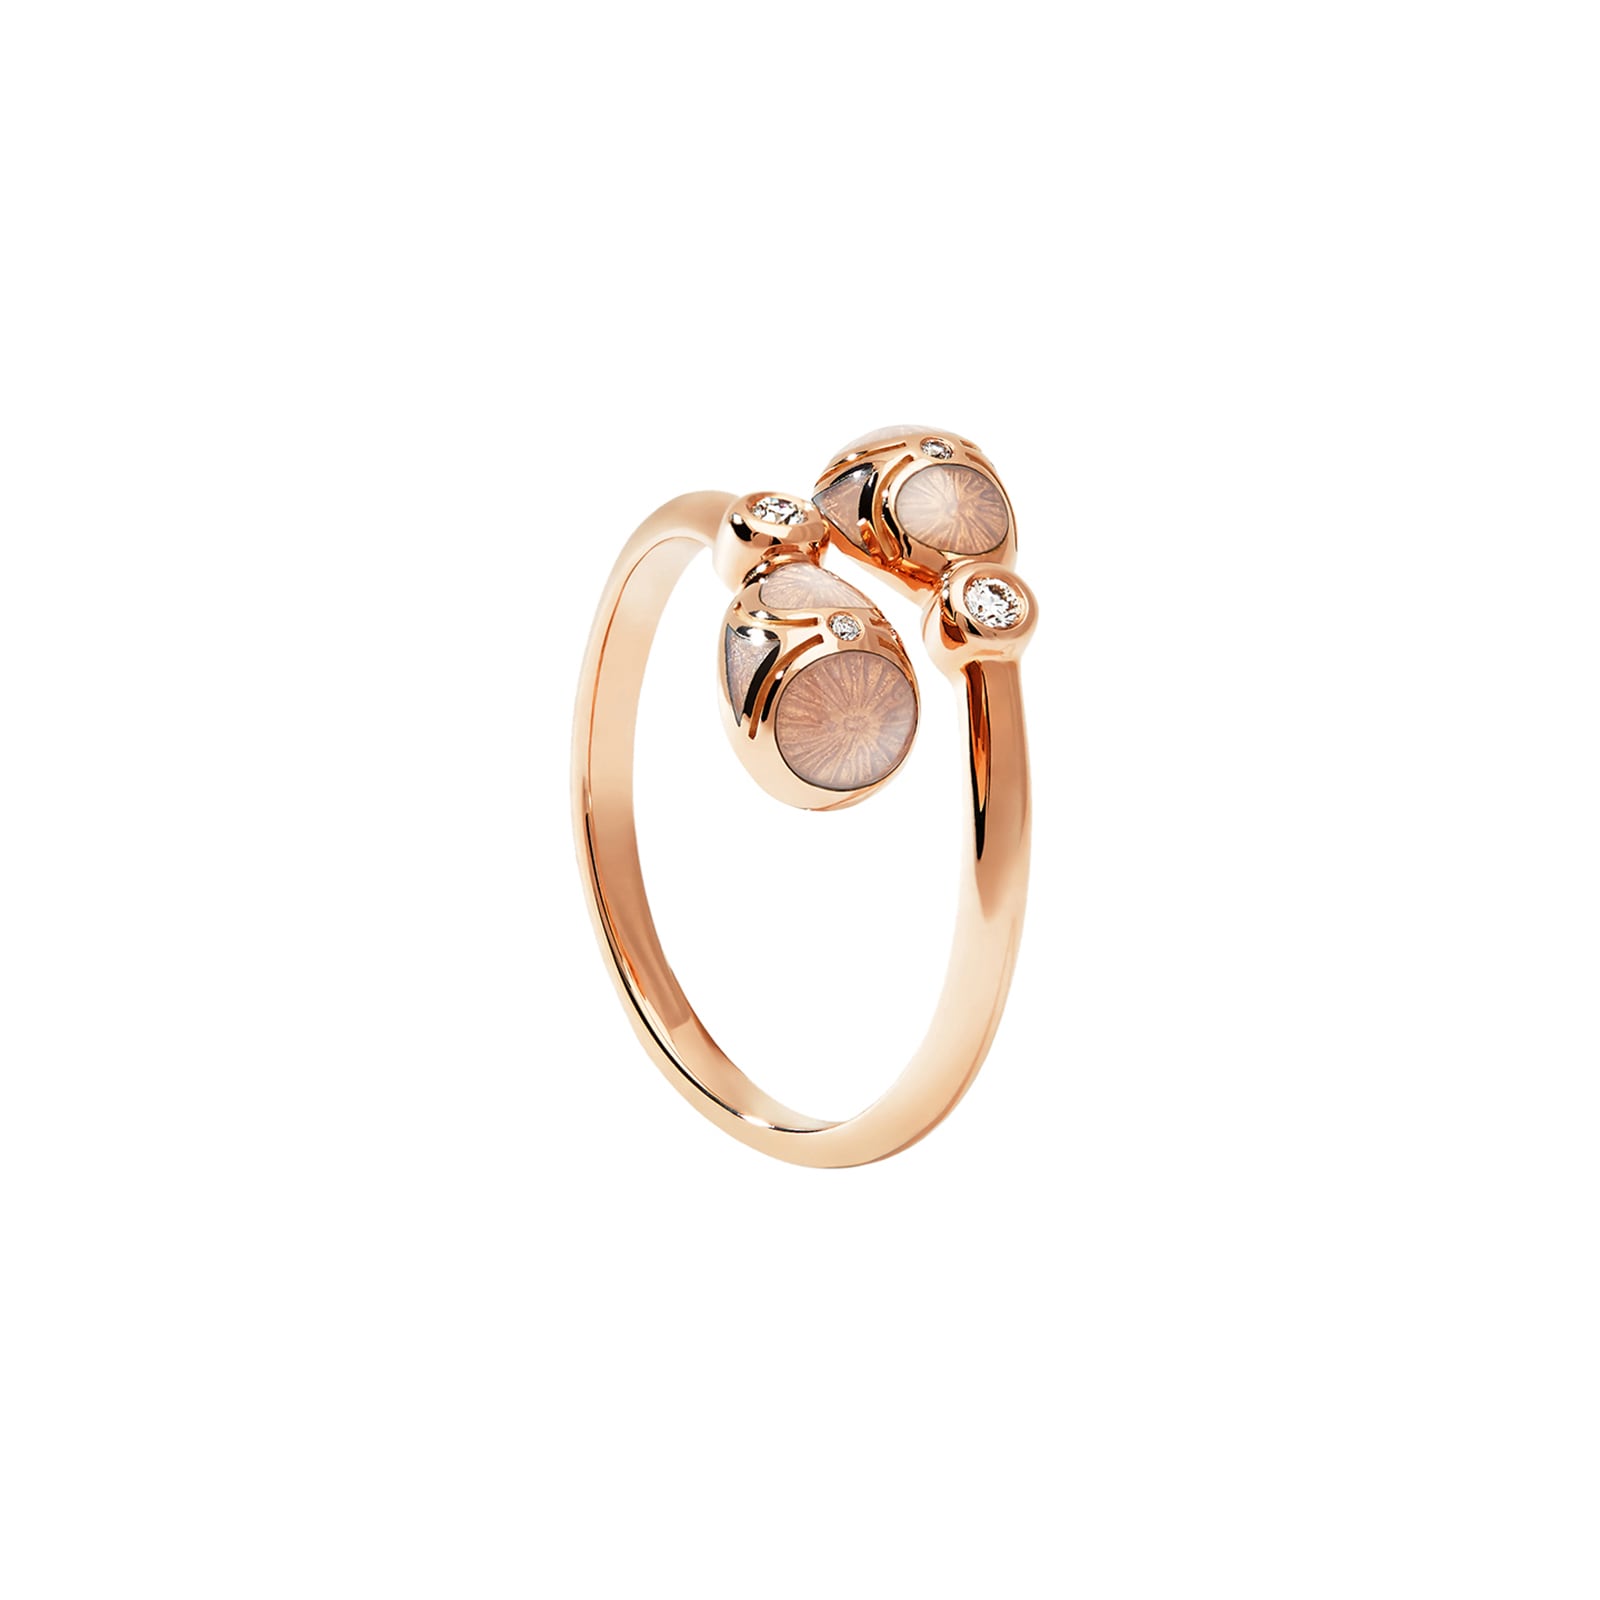 Fabergé Heritage 18ct Rose Gold Diamond & Pink Enamel Crossover Ring ...